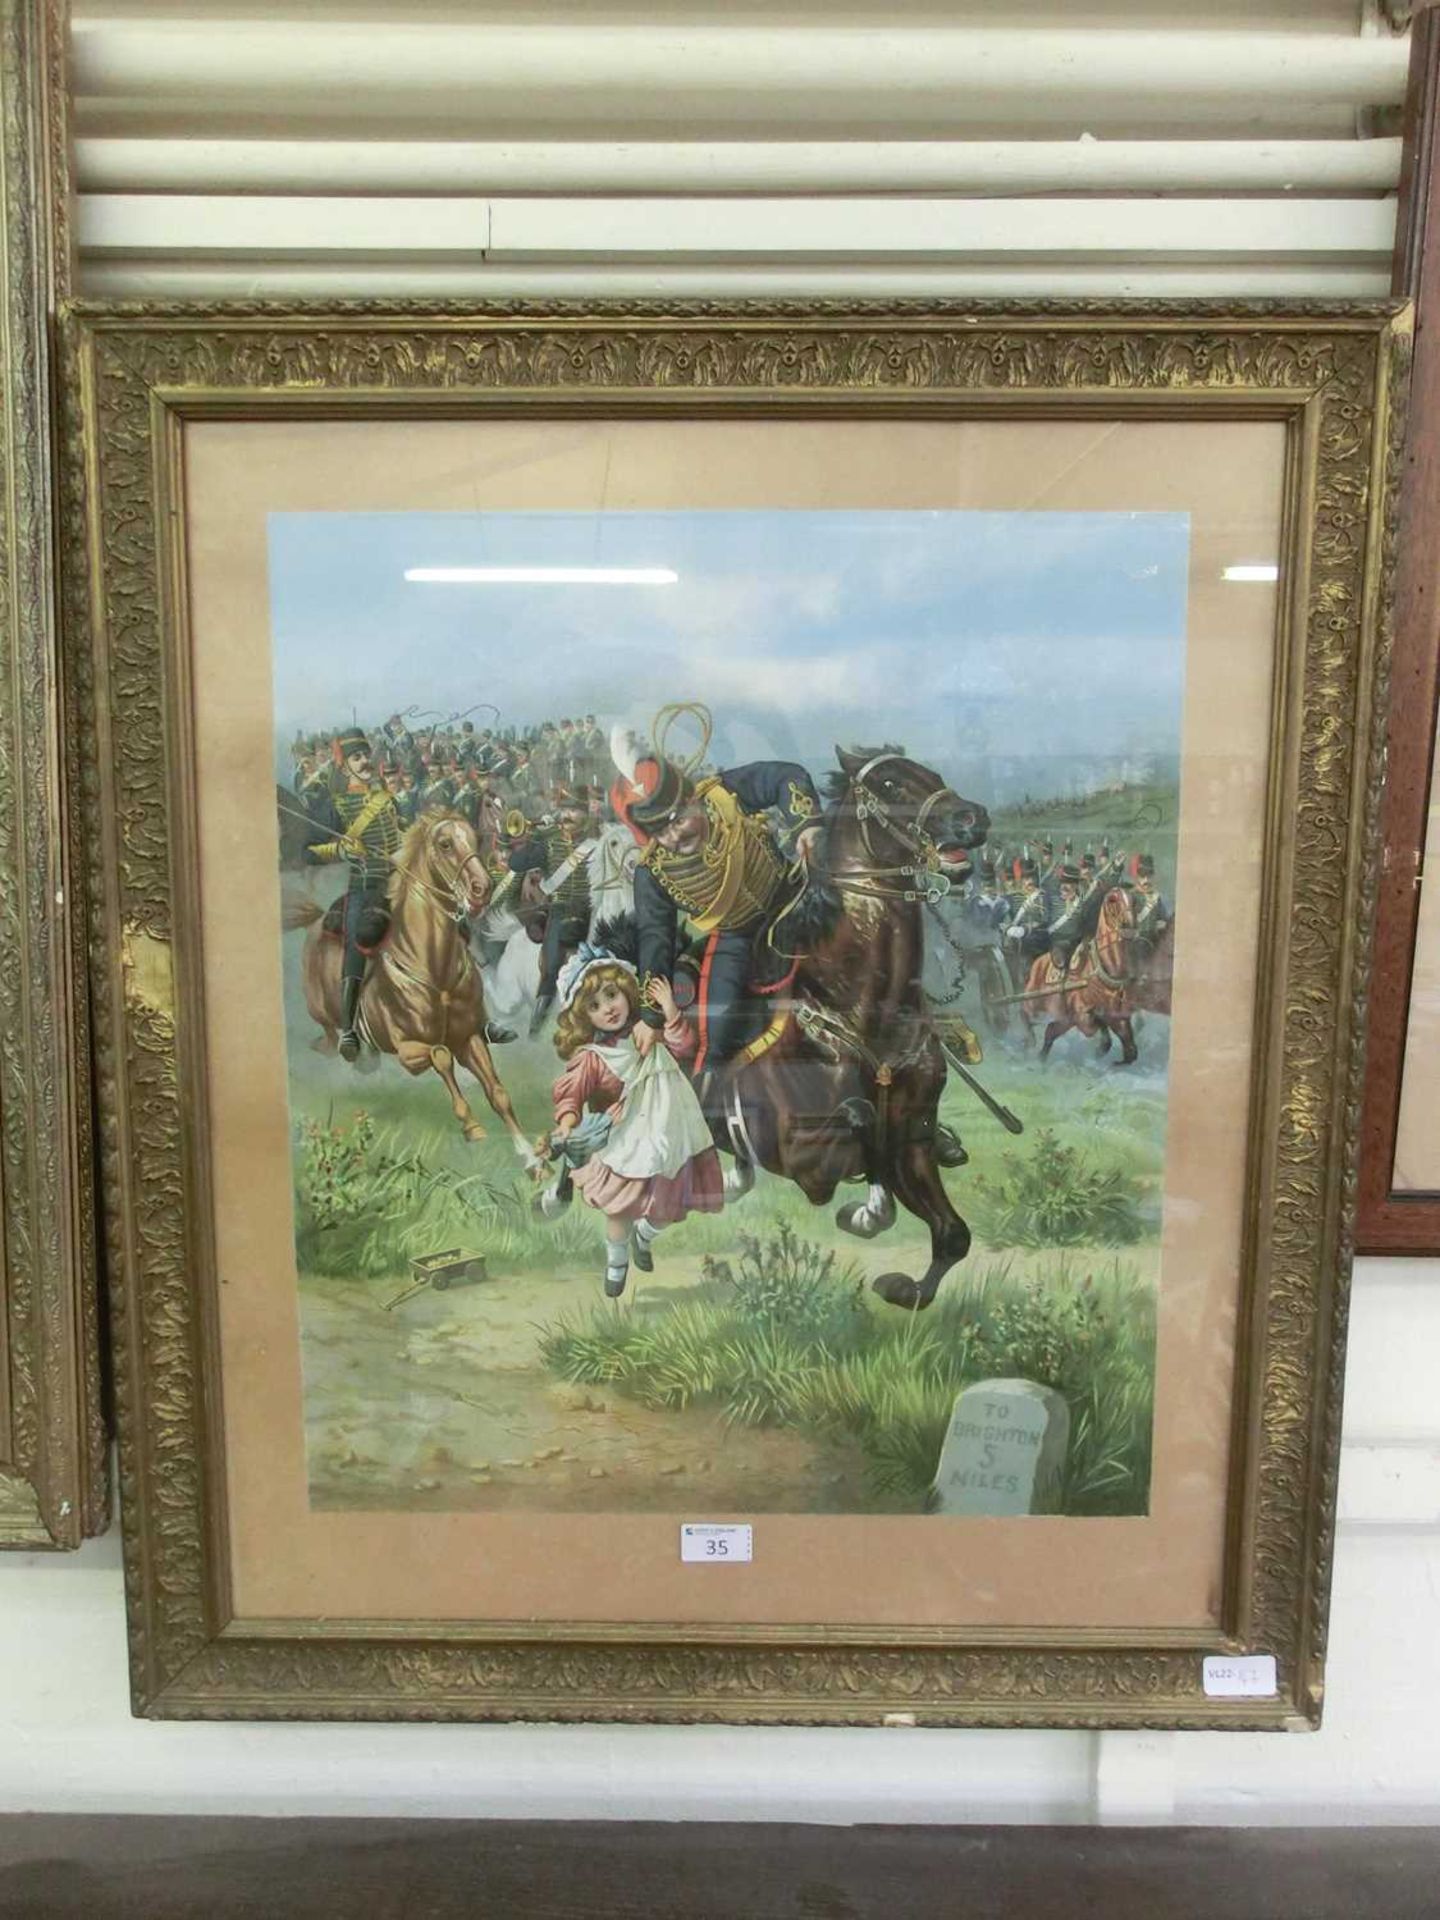 A gilt framed and glazed 19th century print of military horseman rescuing young child